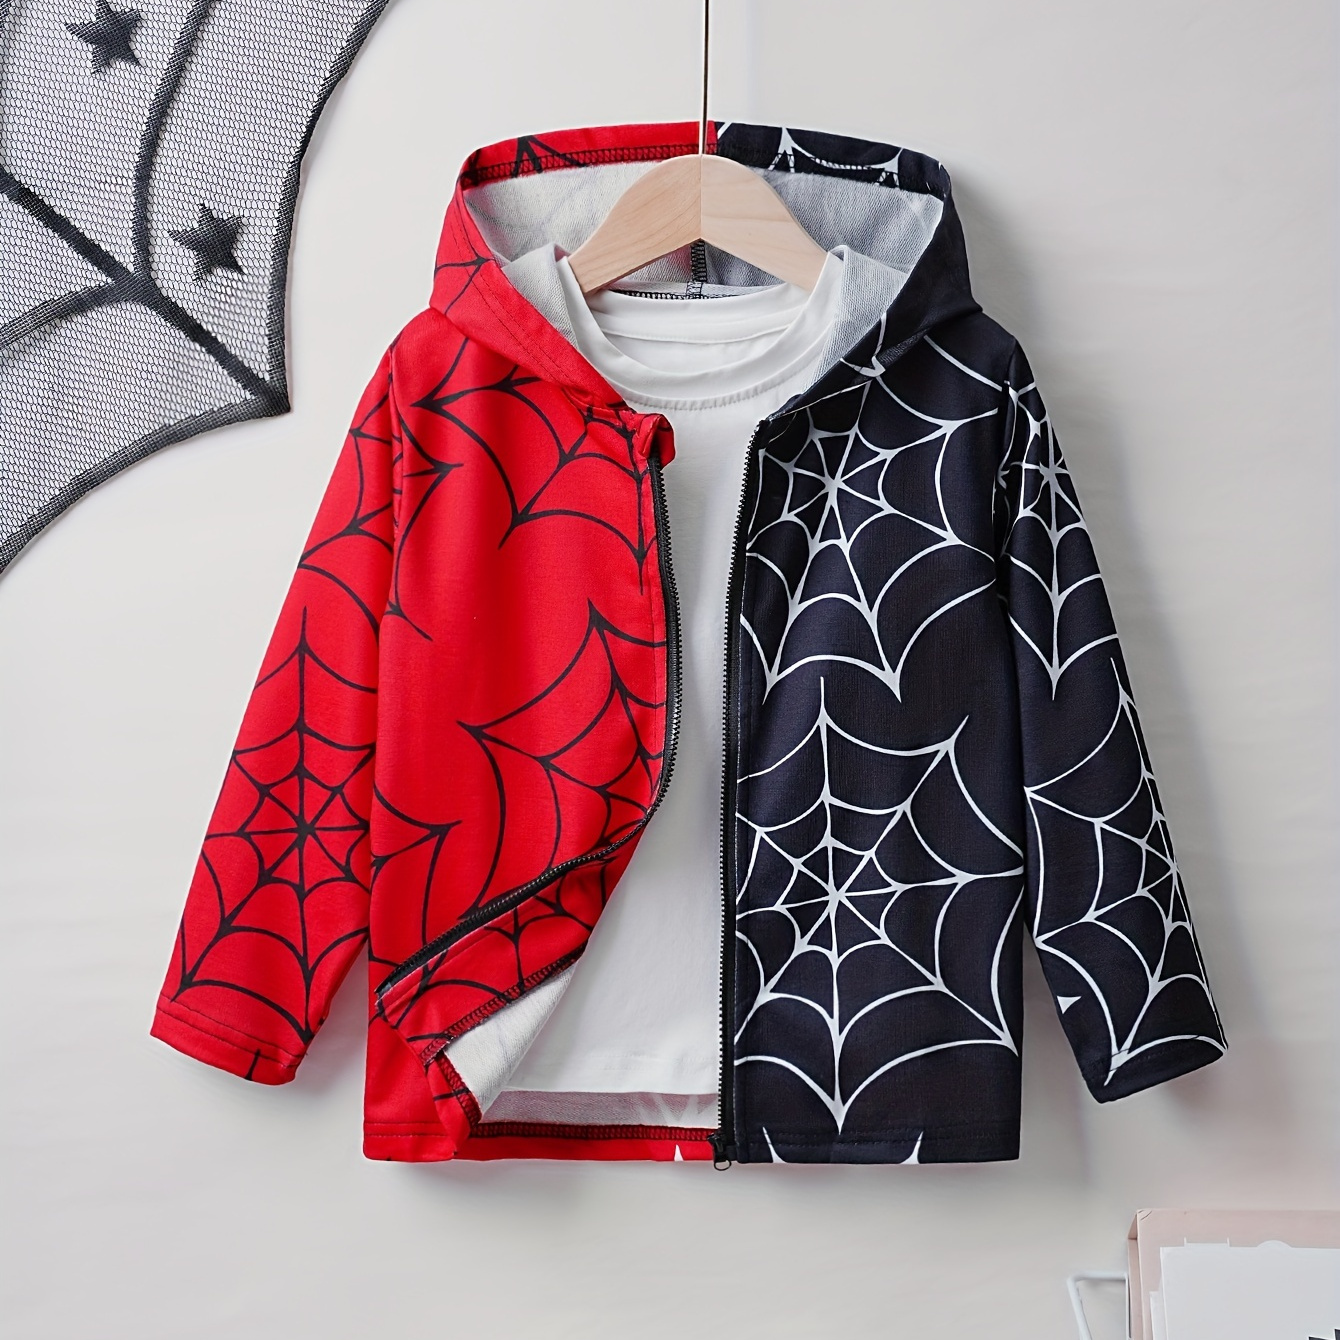 

Cool Spider Web Graphic Print Boys Zip Up Hoodie Sweatshirt Casual Long Sleeve Hoodies With Pockets Gym Sports Hooded Jacket